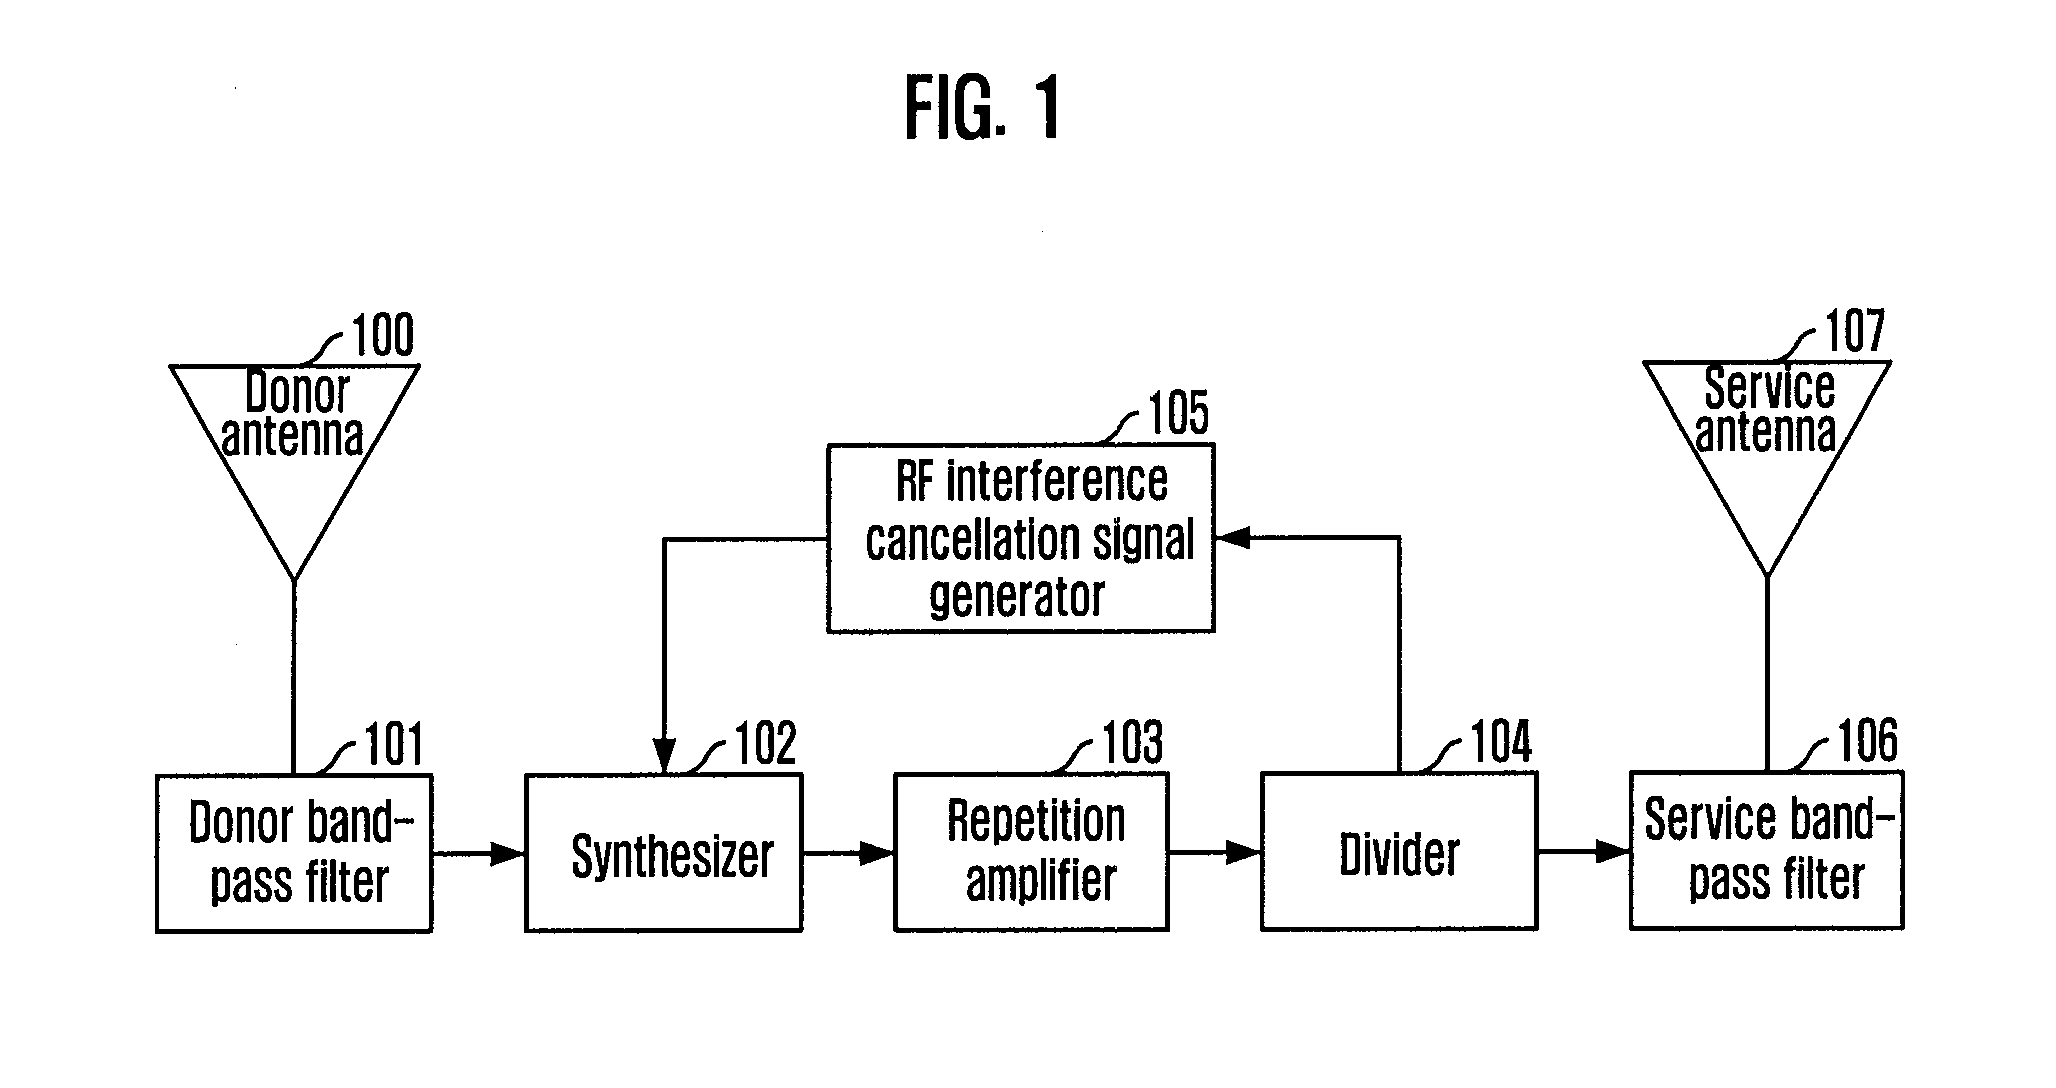 Wireless repeater apparatus for canceling interference signal